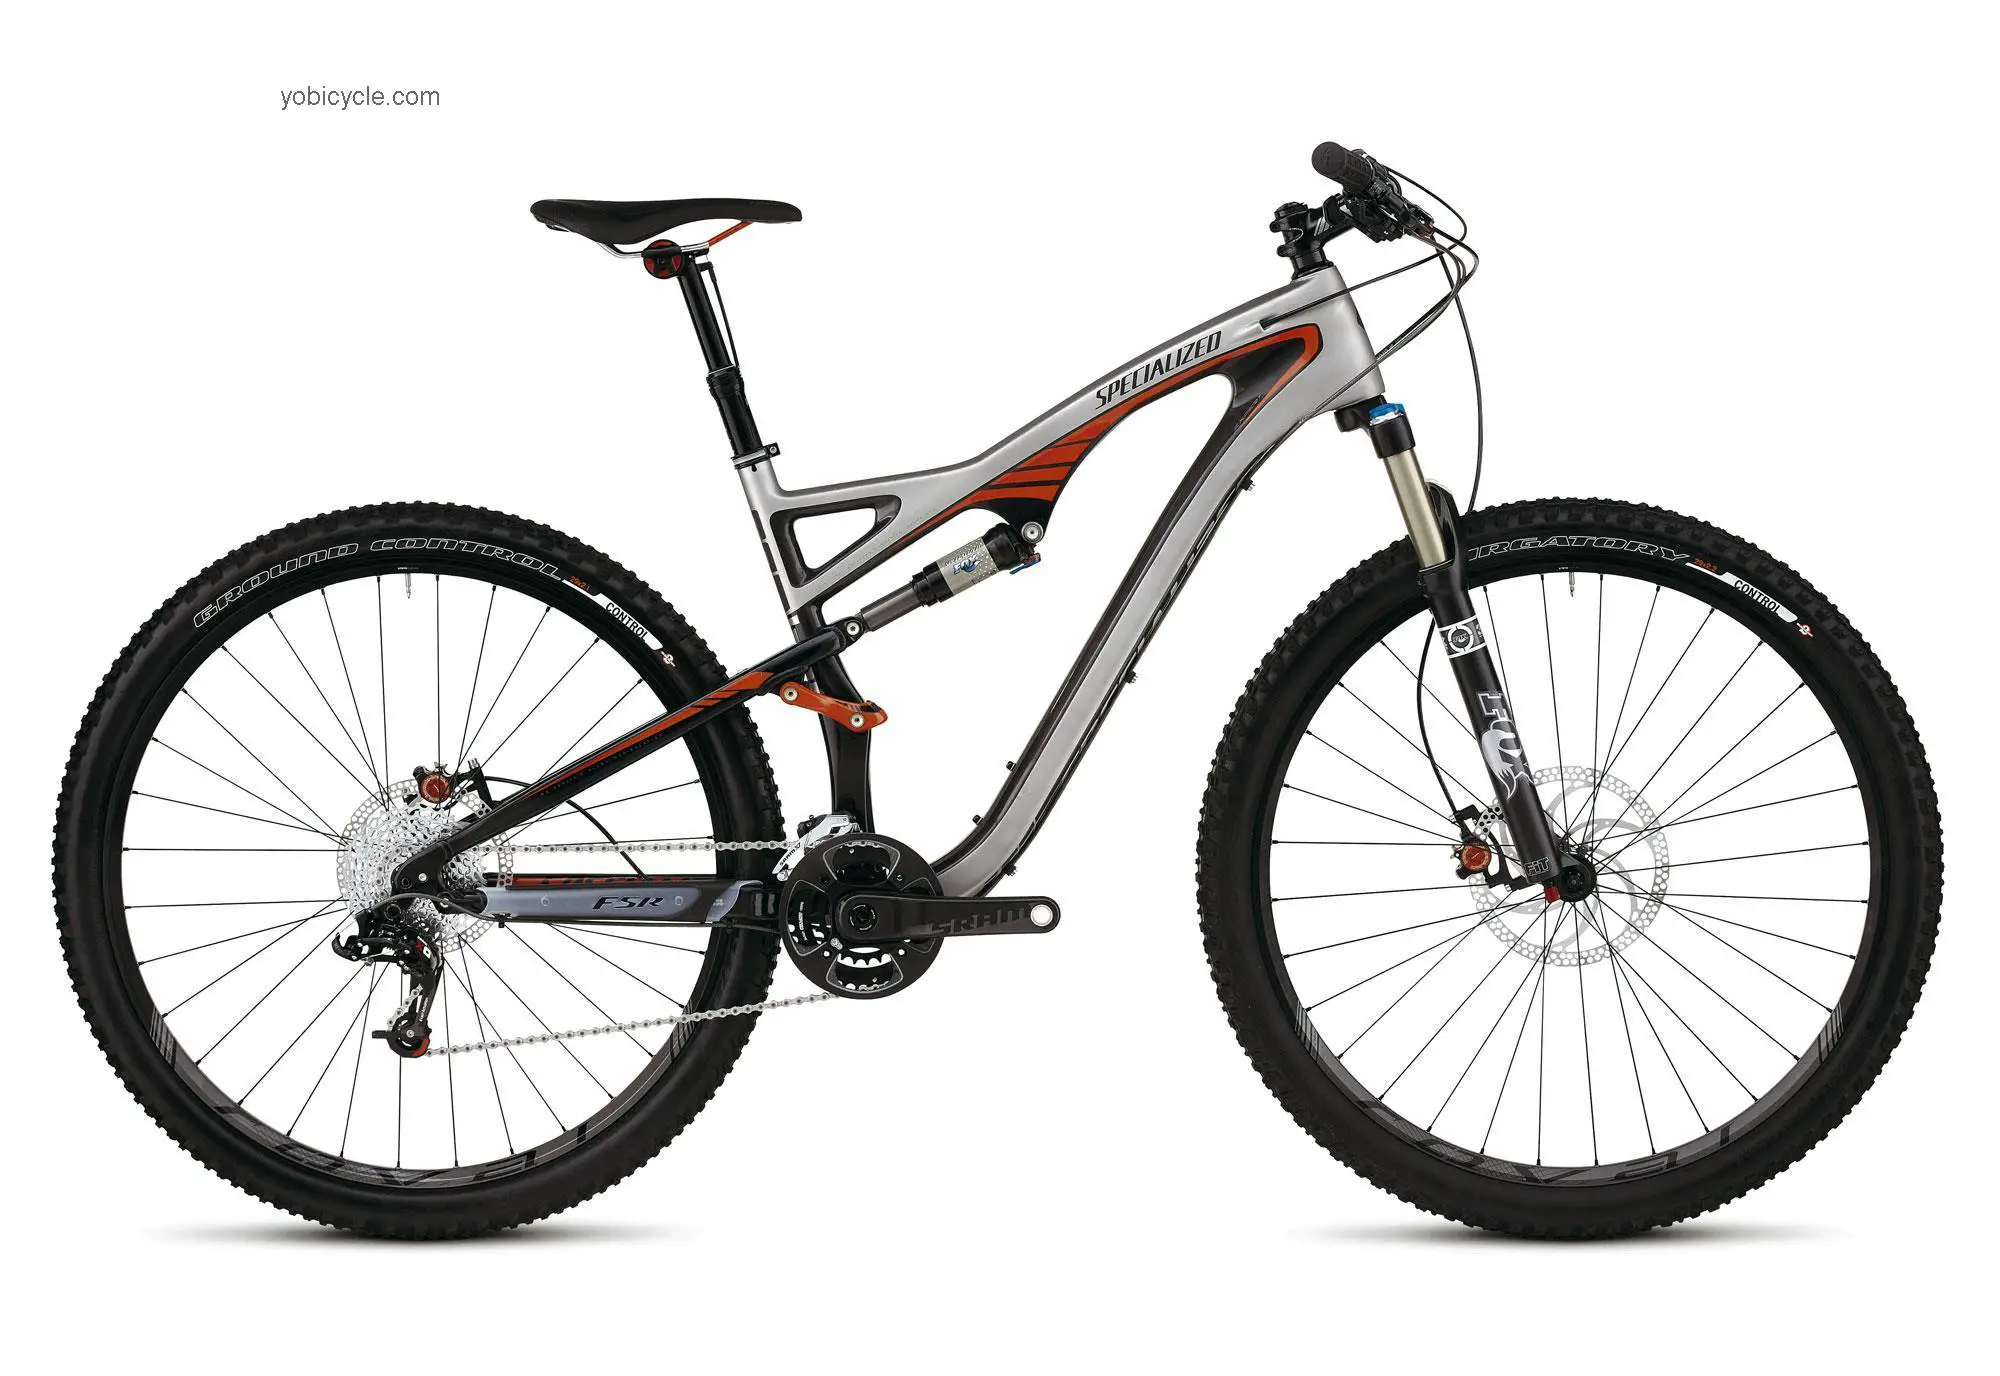 Specialized Camber FSR Expert Carbon 29 2012 comparison online with competitors